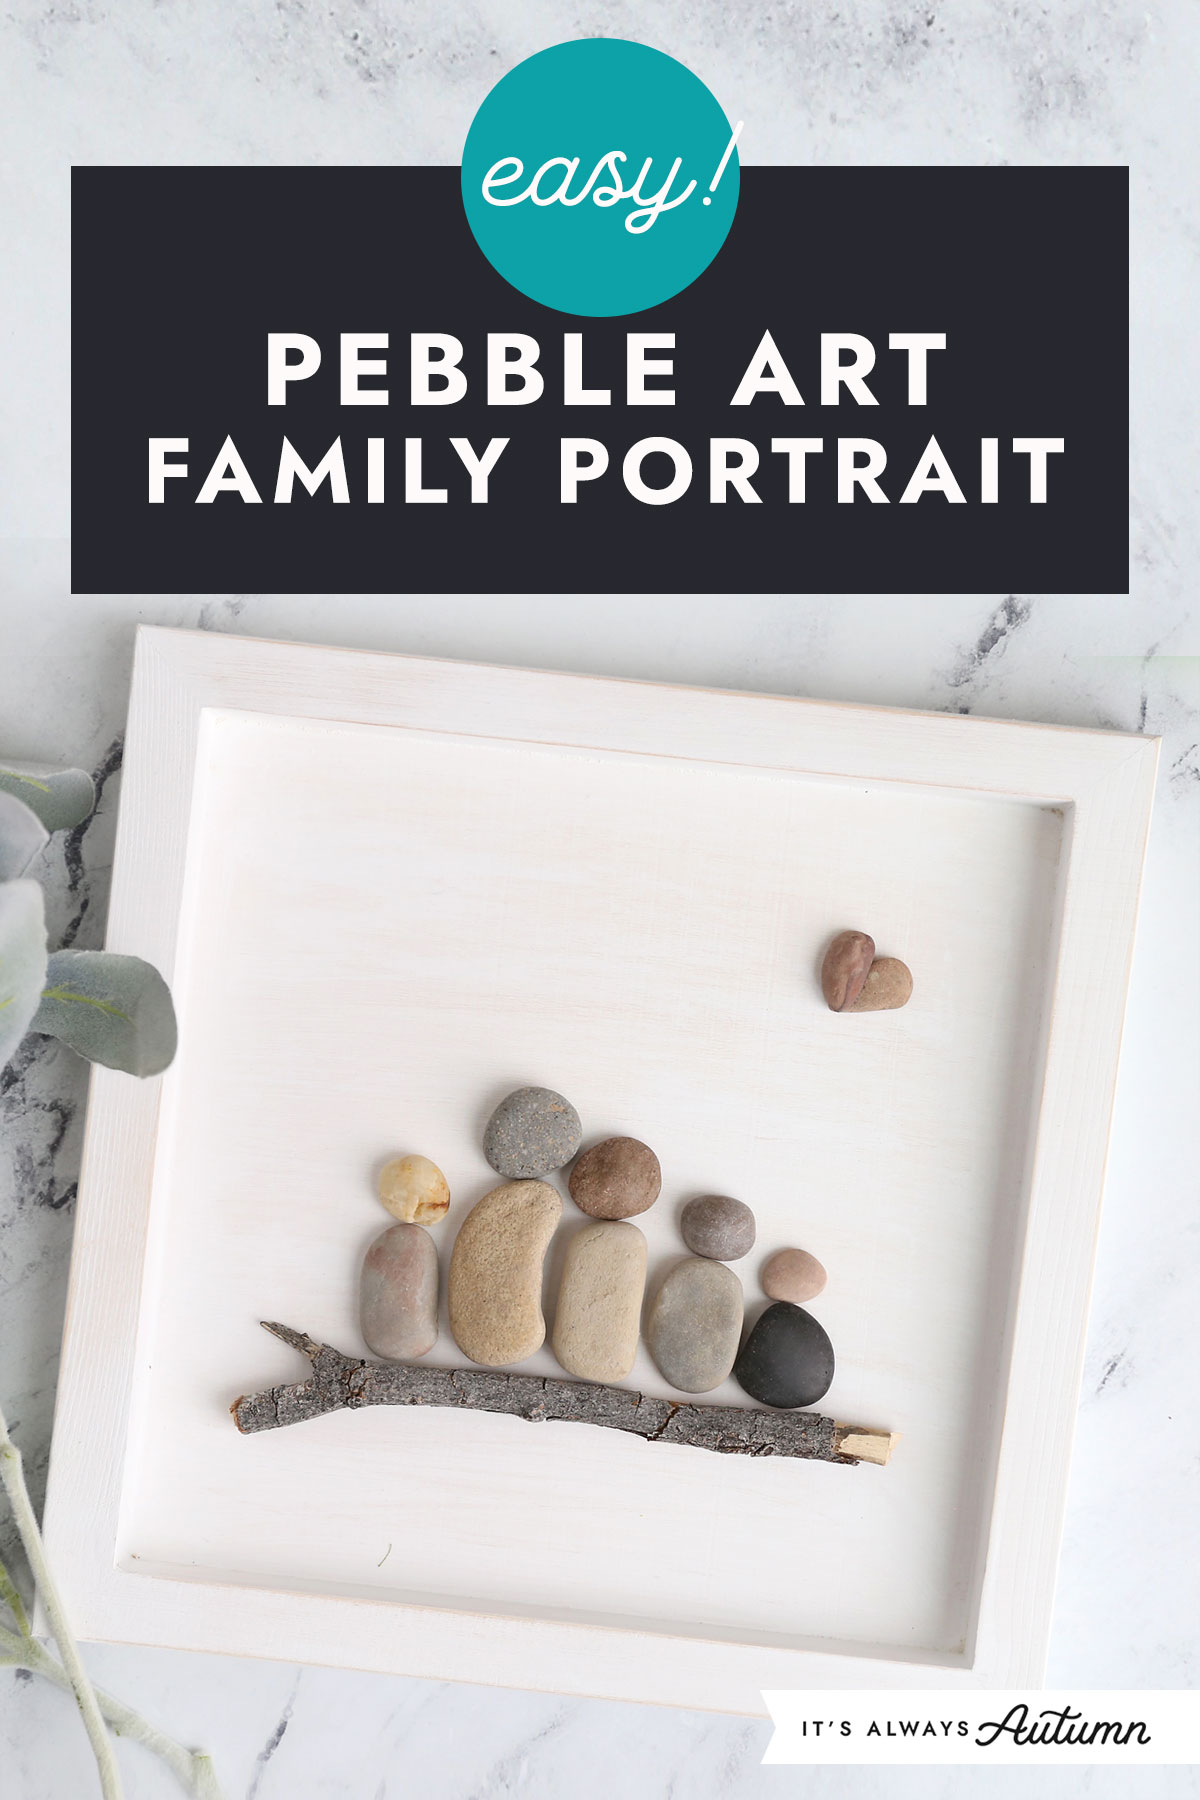 Unique Ways to Craft with Stones and Pebbles